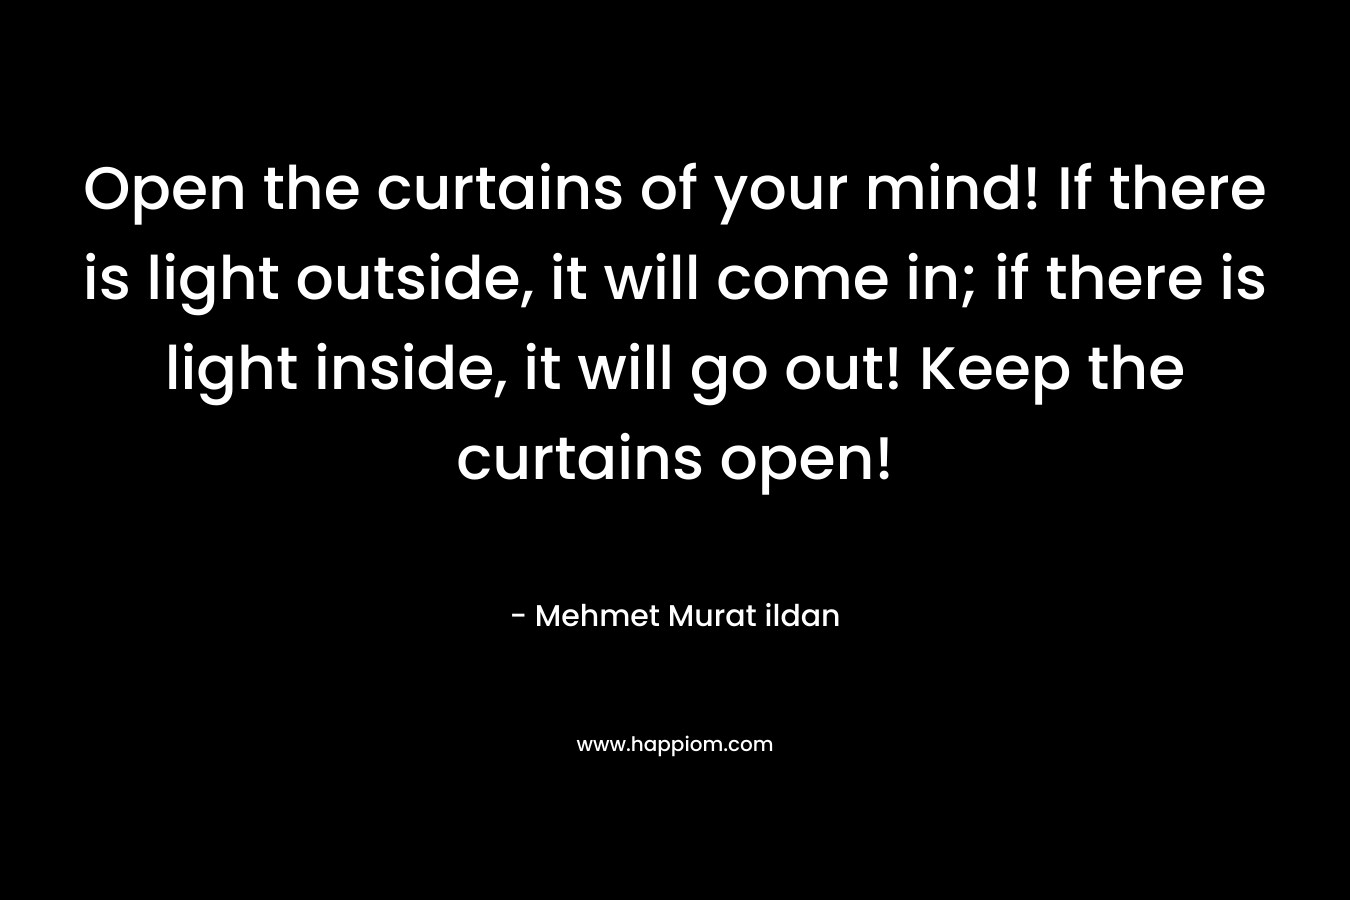 Open the curtains of your mind! If there is light outside, it will come in; if there is light inside, it will go out! Keep the curtains open! – Mehmet Murat ildan